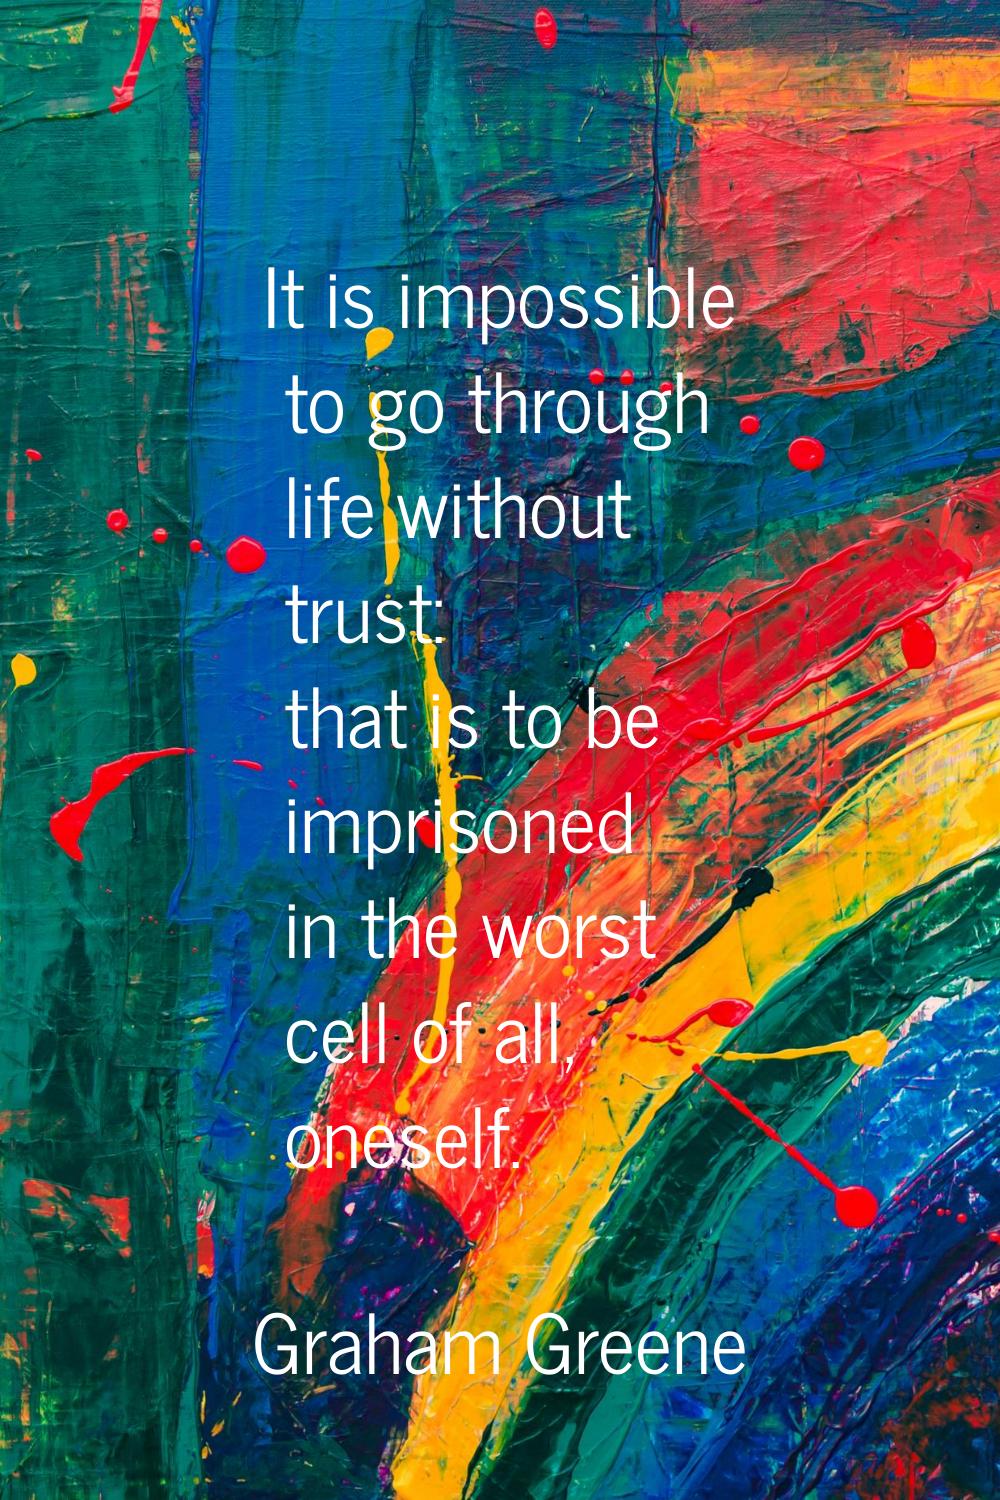 It is impossible to go through life without trust: that is to be imprisoned in the worst cell of al